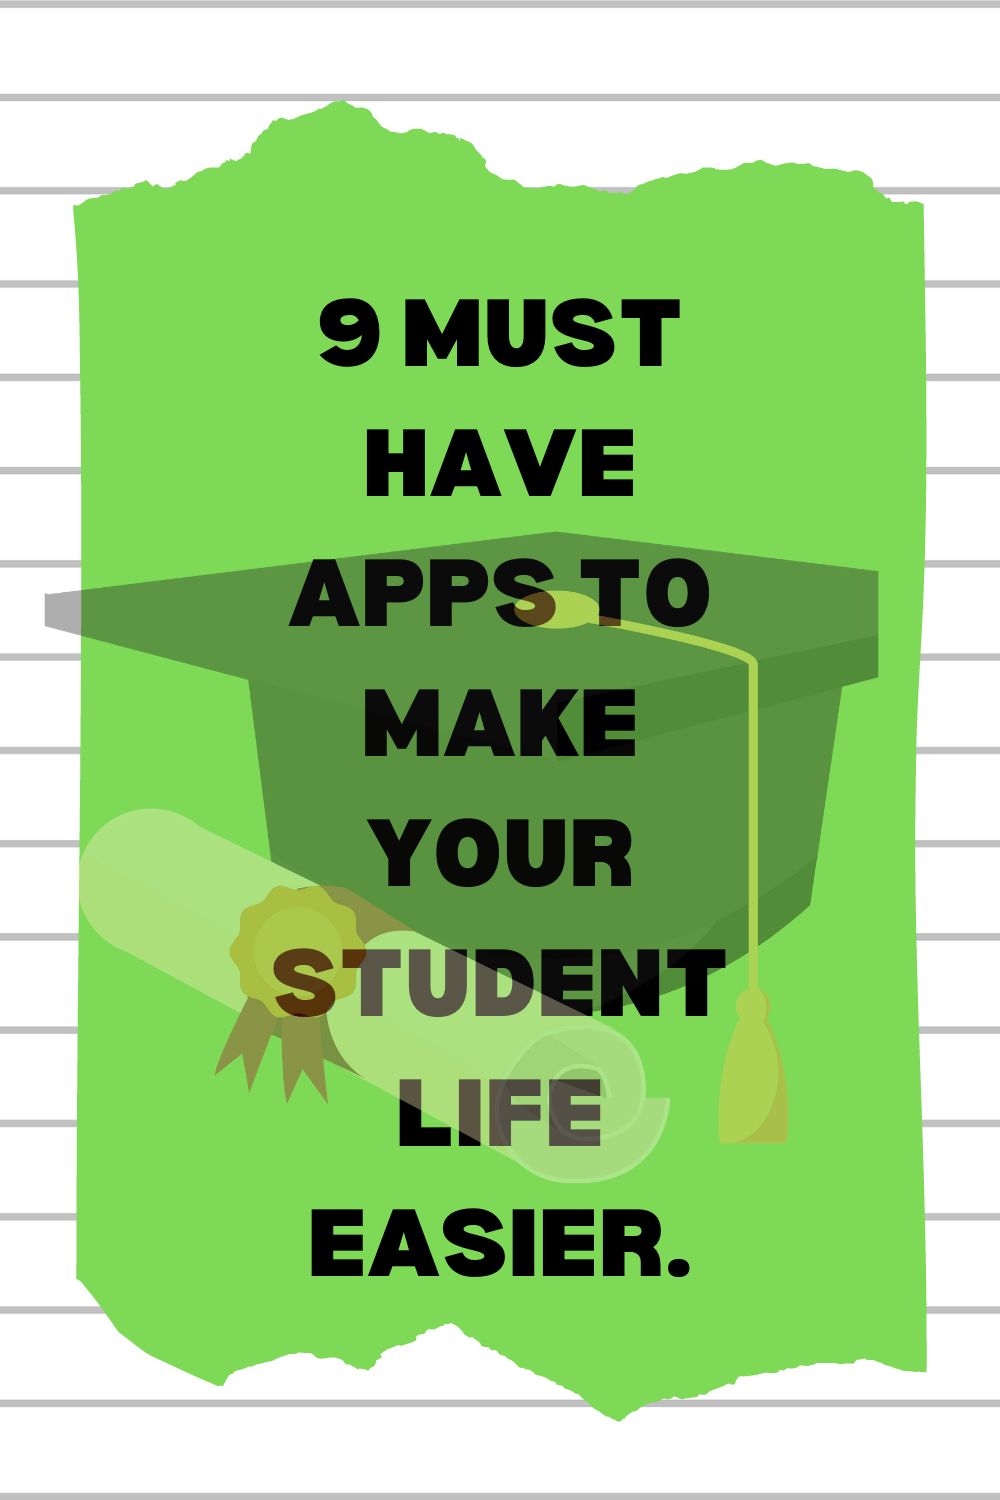 9 MUST HAVE APPS TO MAKE YOUR STUDENT LIFE EASIER.